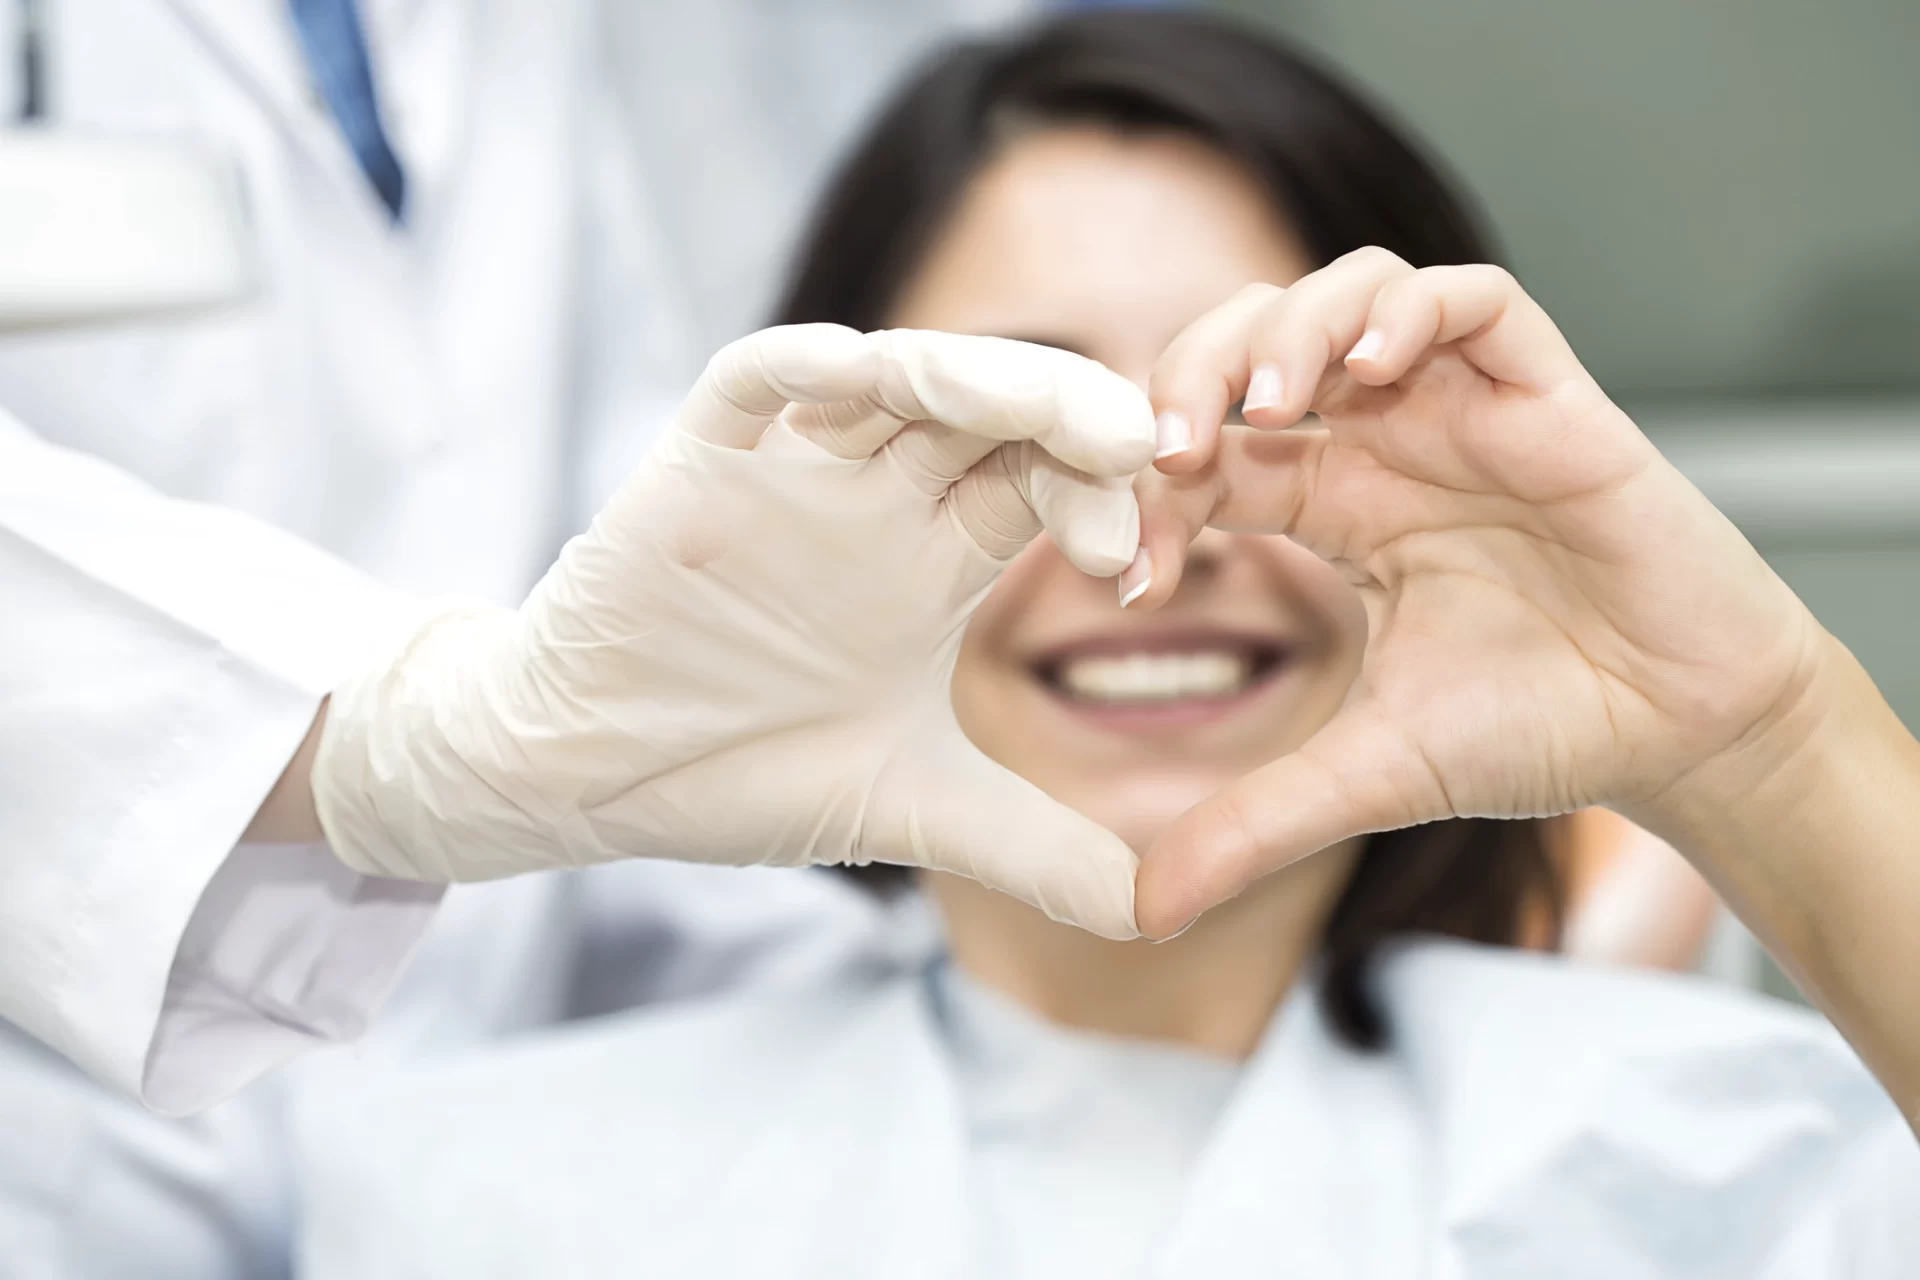 hands making heart formation around dental patient's mouth